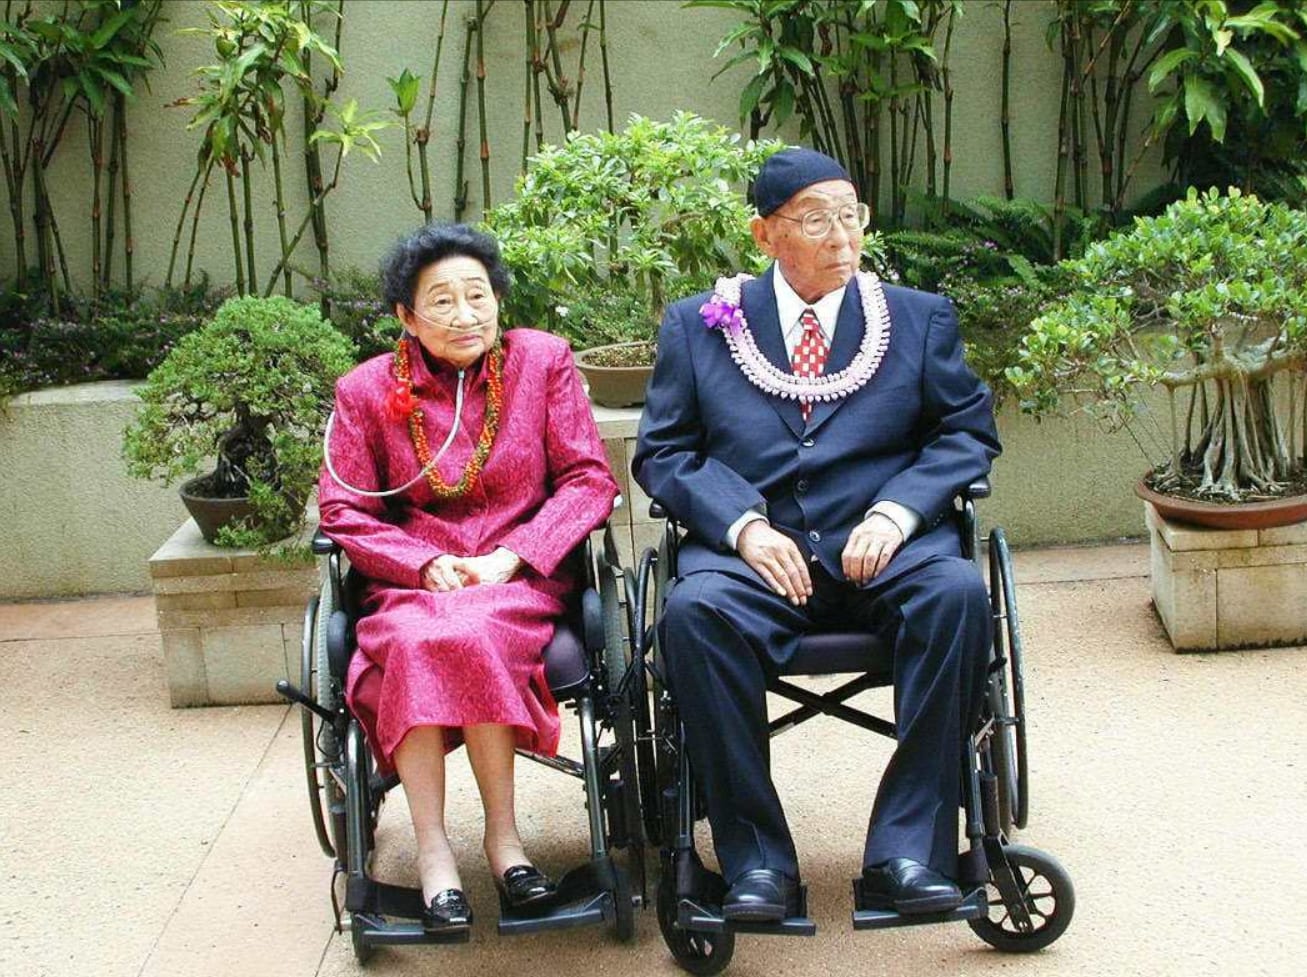 The last surviving Chinese Warlord, Zhang Xueliang, with his wife in Hawaii in 2000. He was best remembered as the womanizing, drug addicted, northern Warlord who ,in 1936, kidnapped Chiang Kai-shek and forced him to ally with the CCP as the Japanese invaded China. He died in 2001